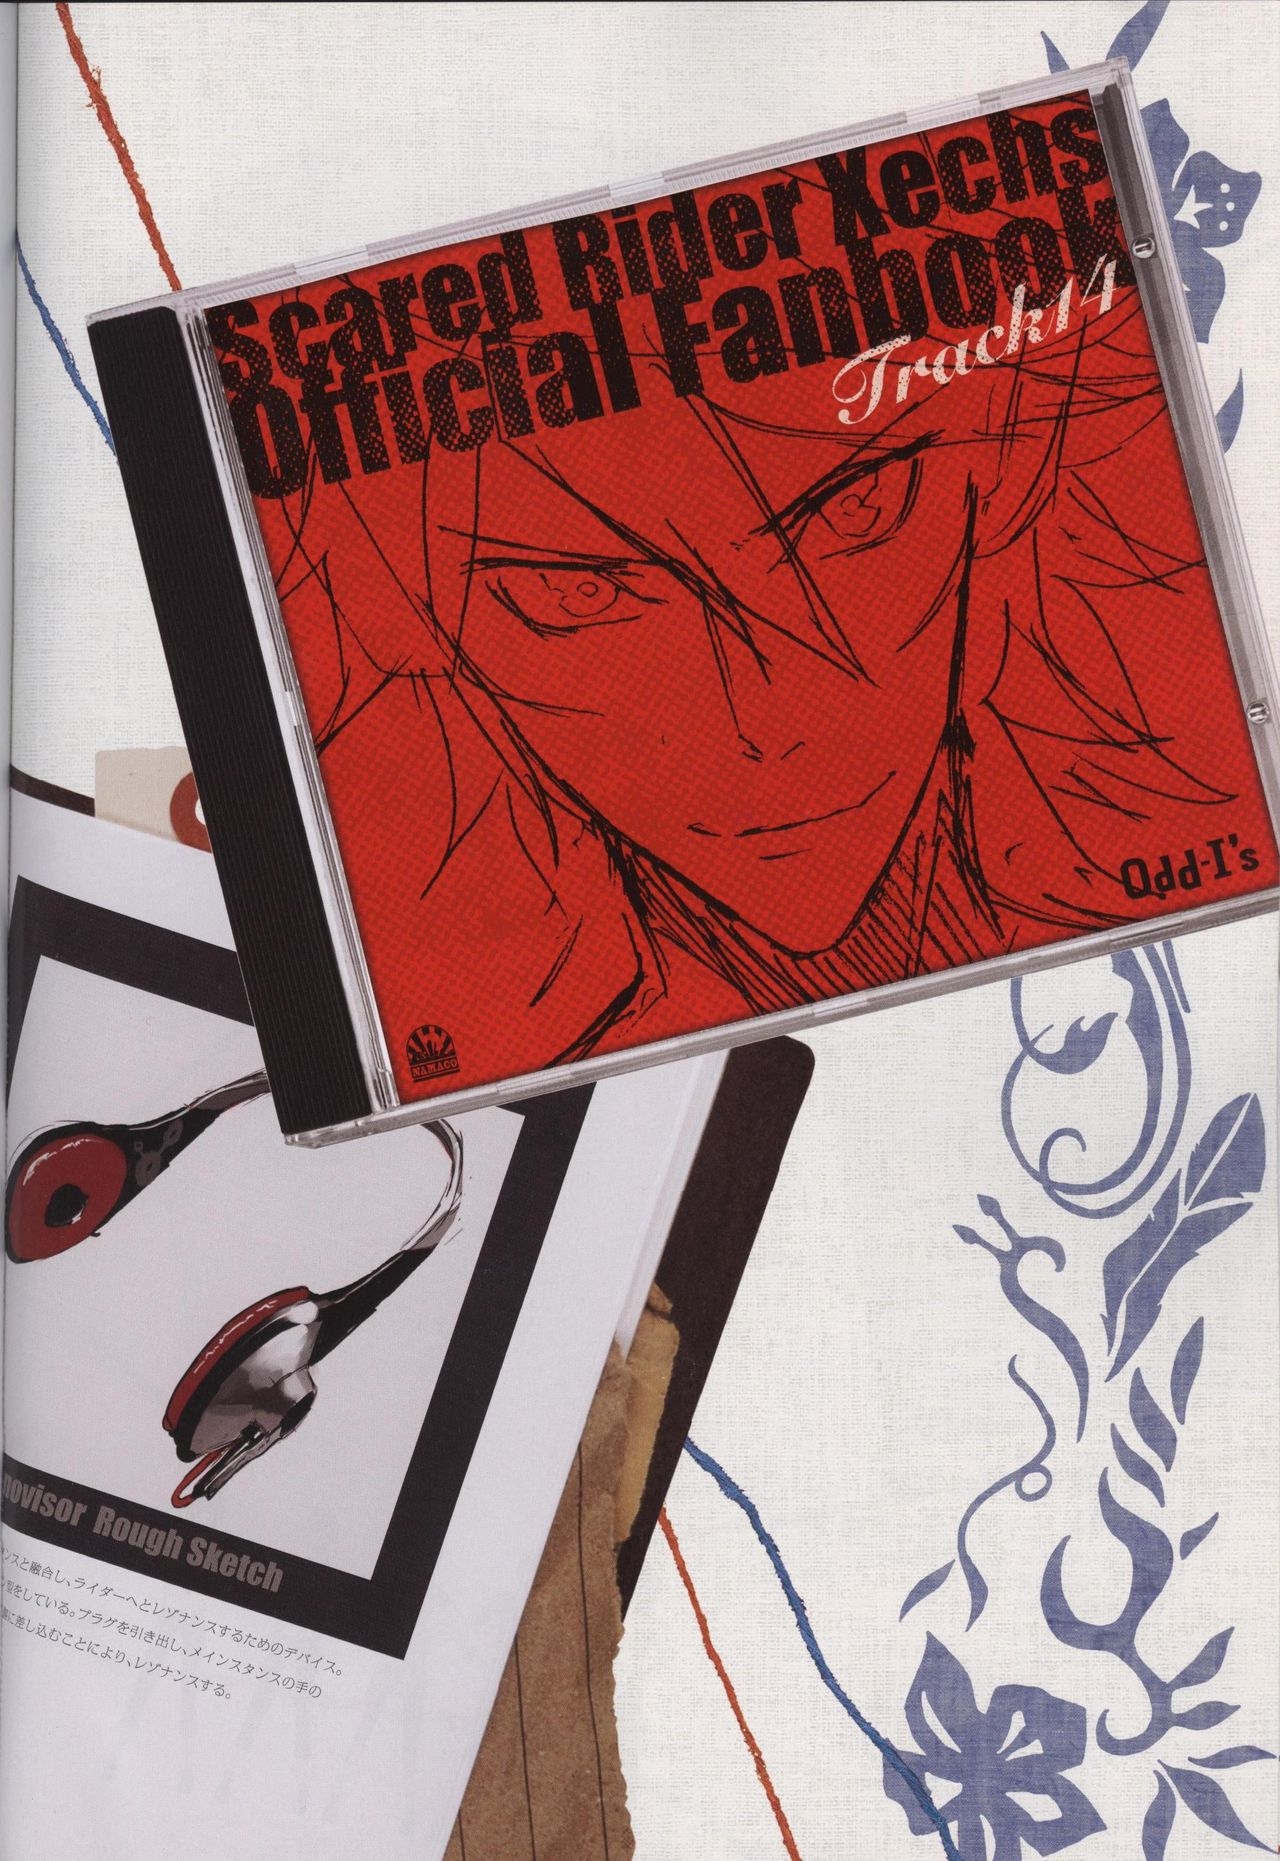 Scared Rider Xechs Official Fanbook 8